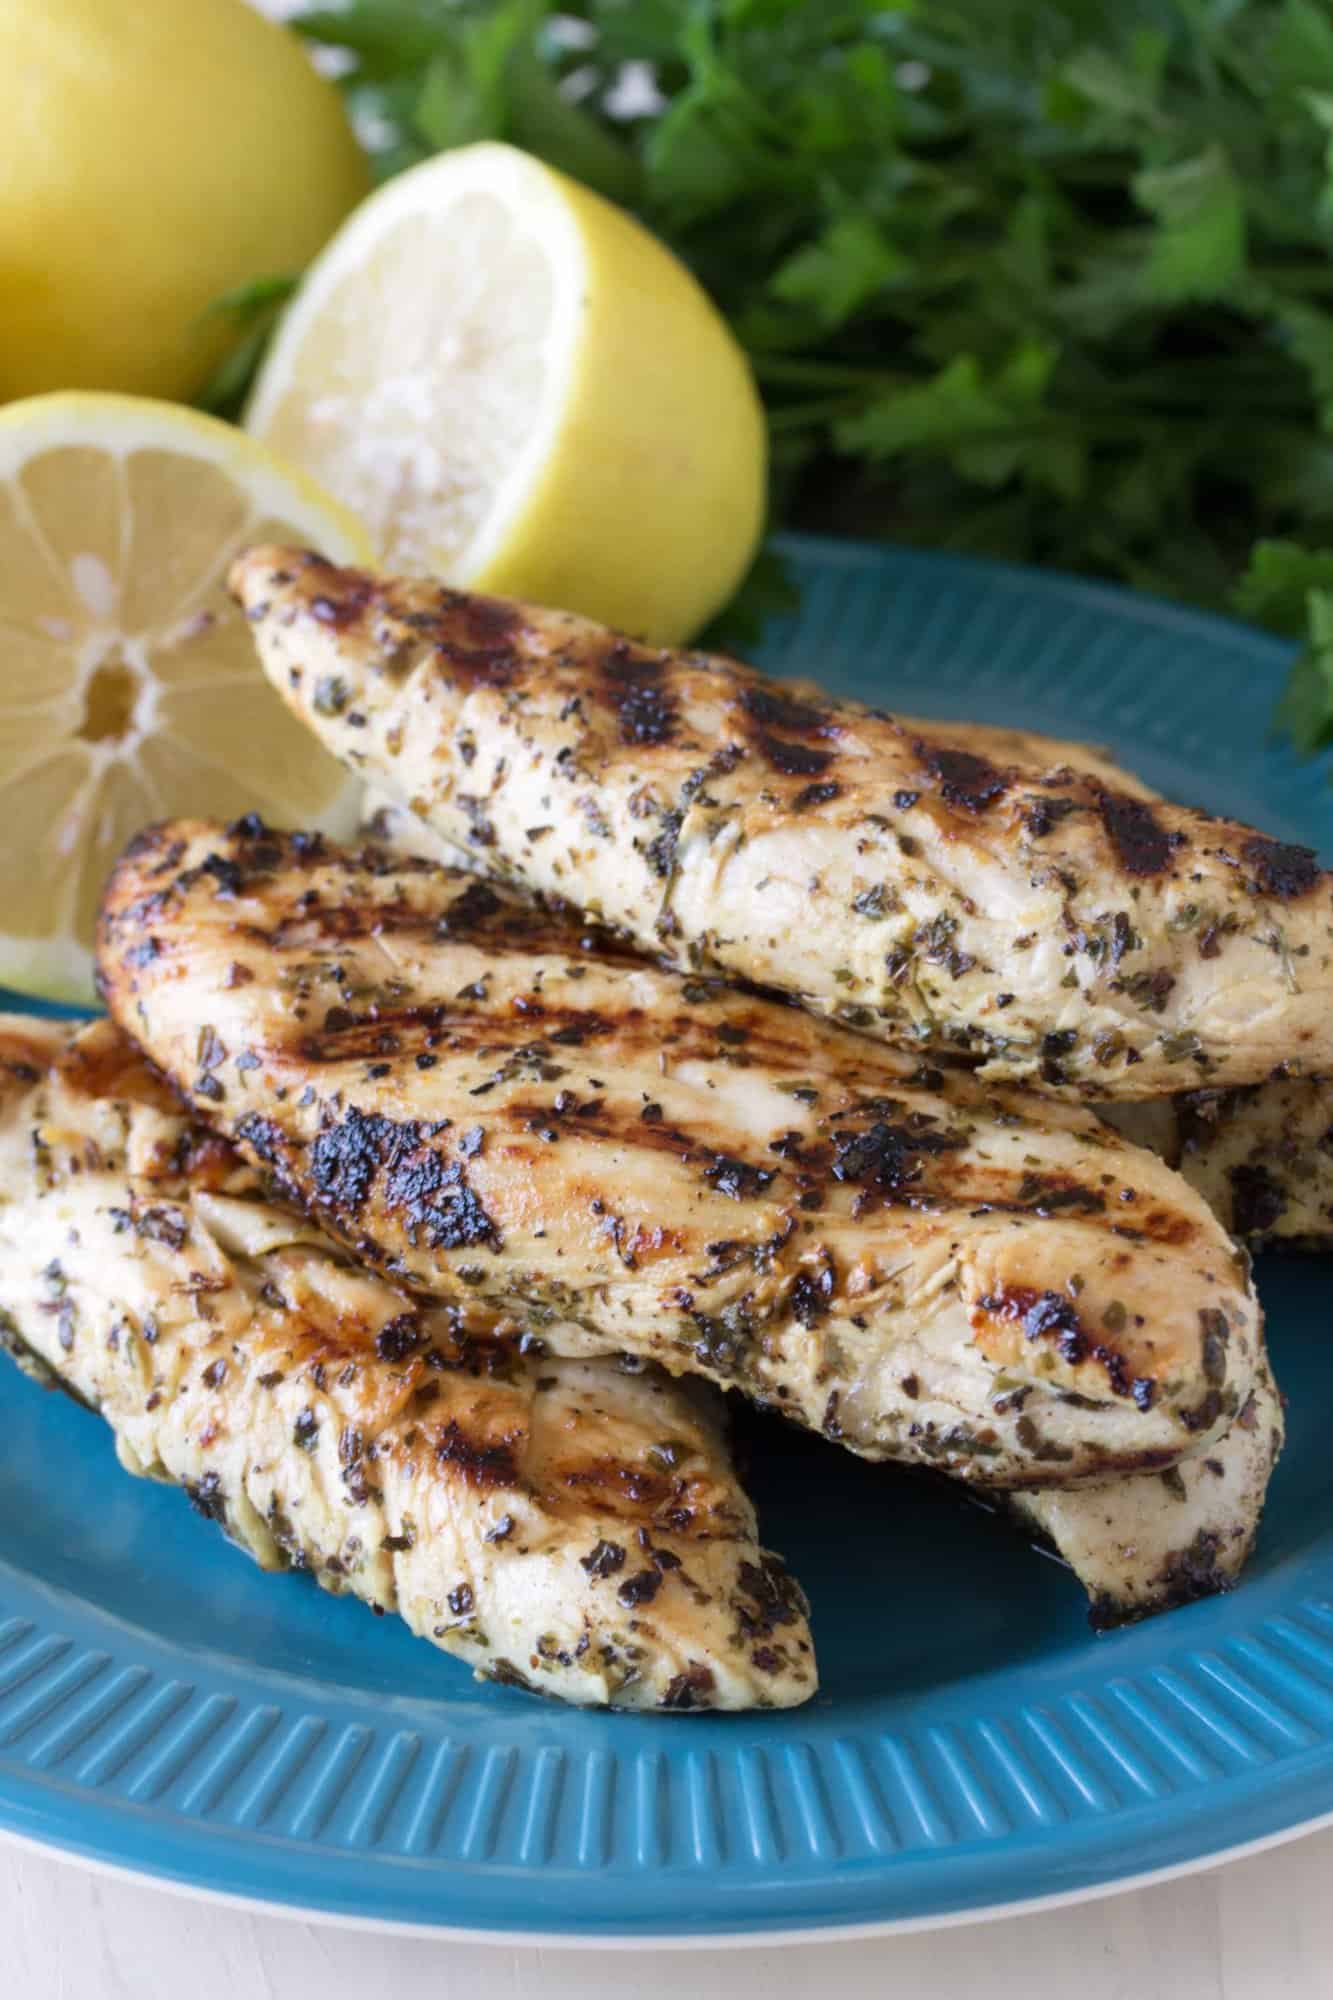 Just 7 simple ingredients is all you need to make these tasty Quick Grilled Lemon Chicken Tenders. Eat them plain or pair them with a salad or pasta. So simple!